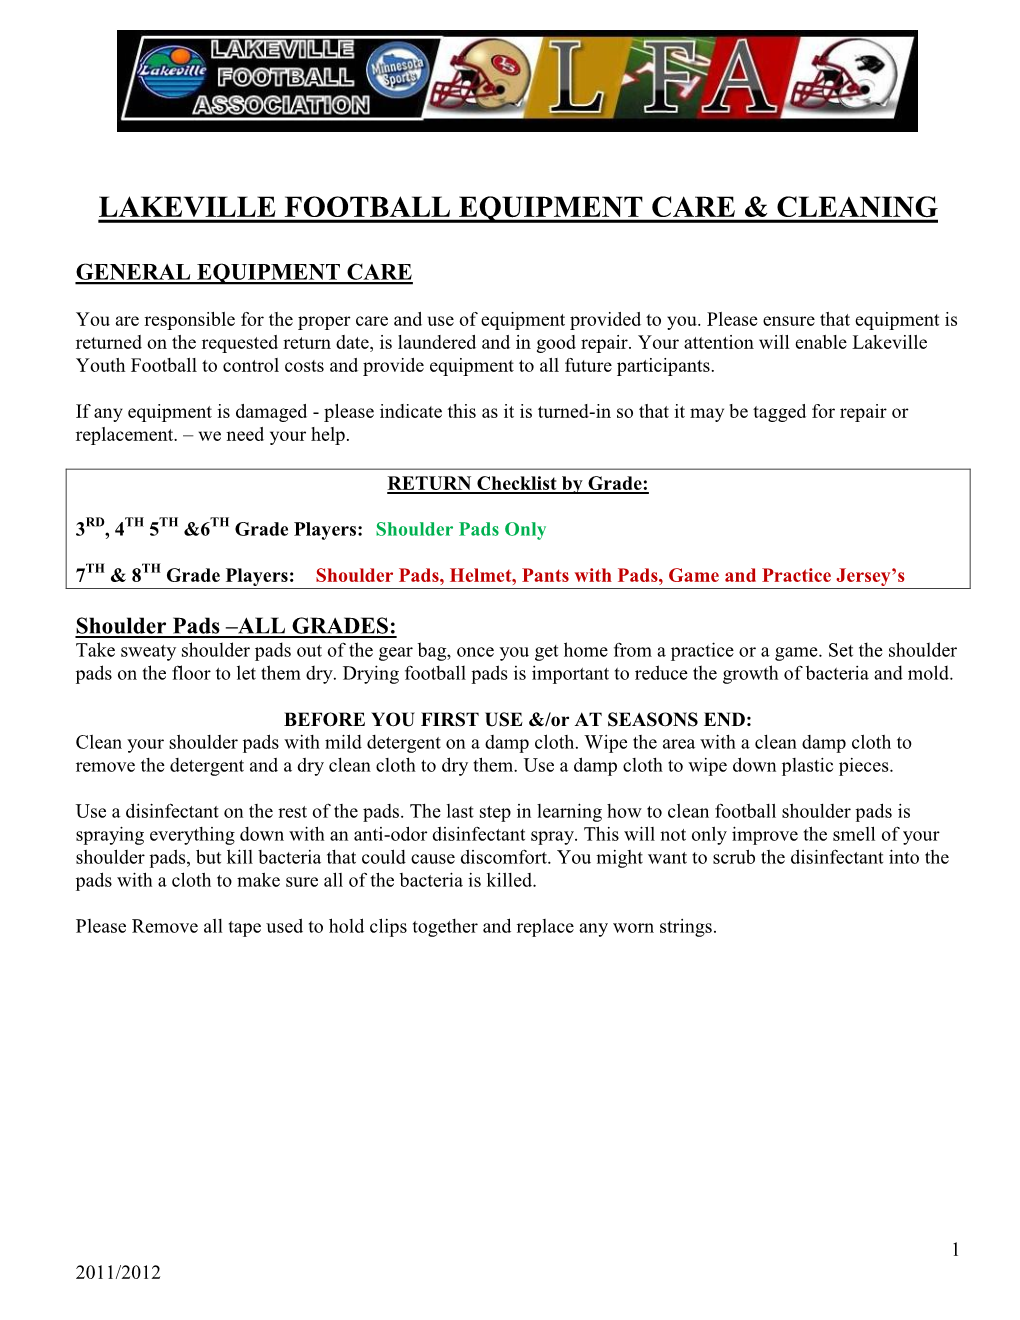 Lakeville Football Equipment Care, Cleaning & Before